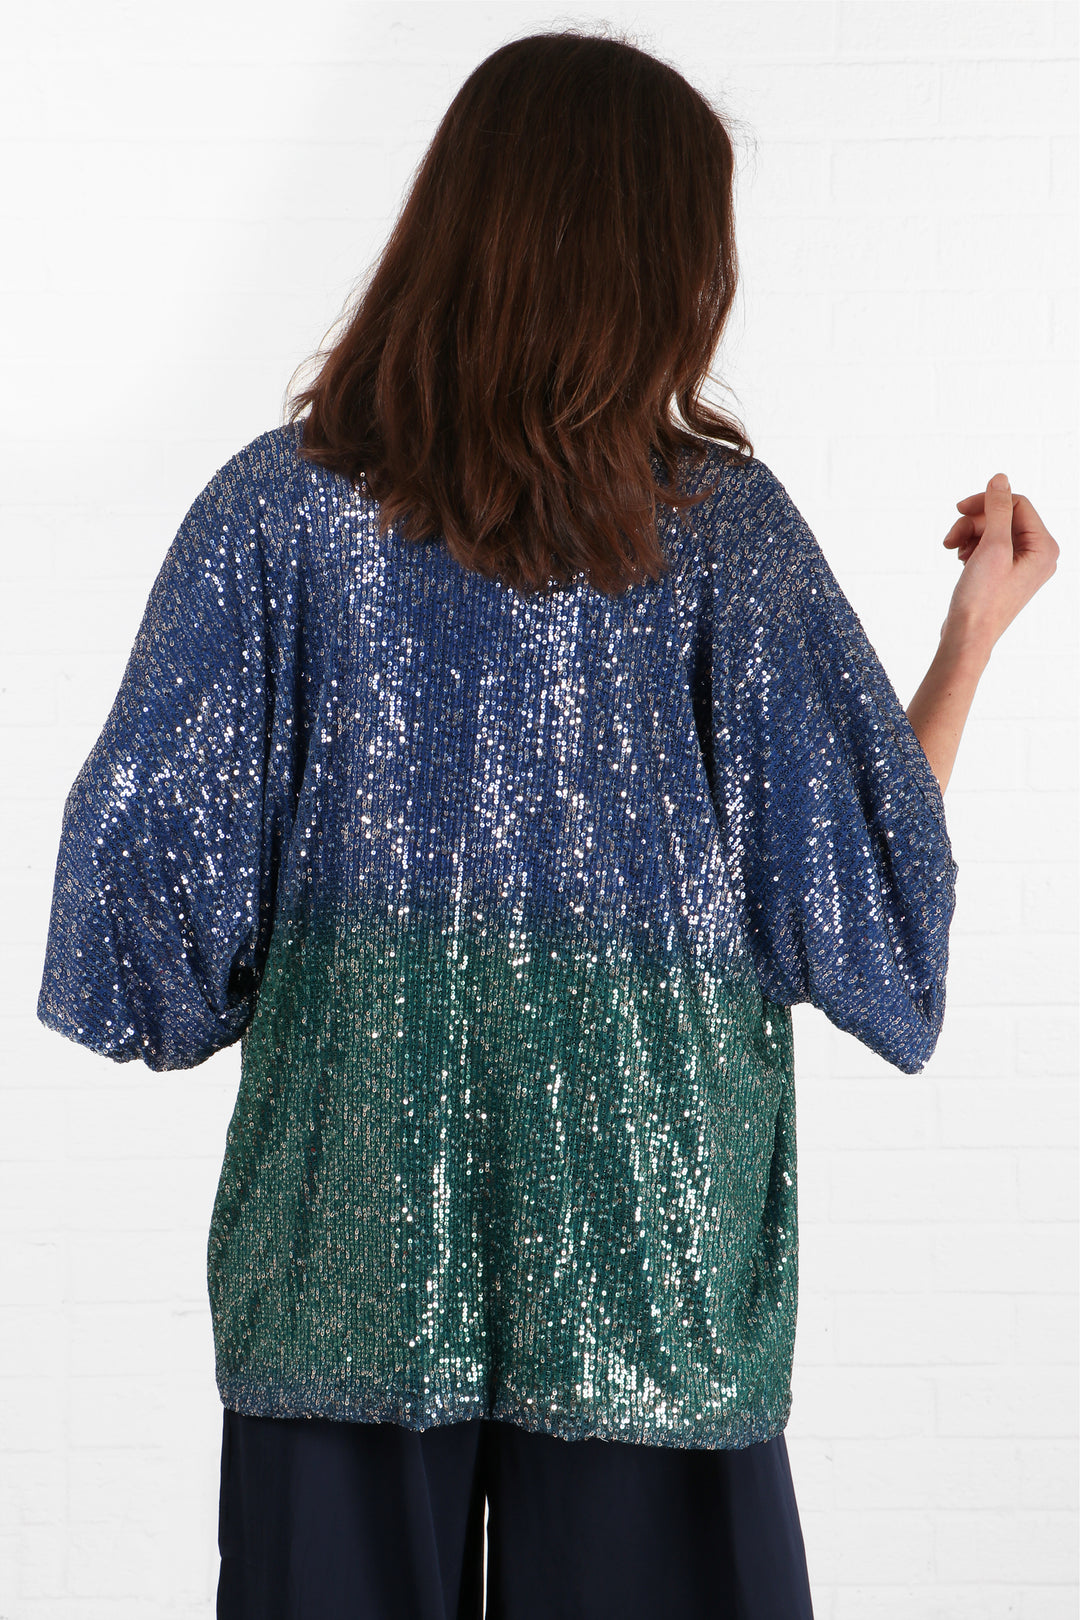 model showing the back of the kimono jacket showing the blue at the top and green at the bottom of the ombre effect